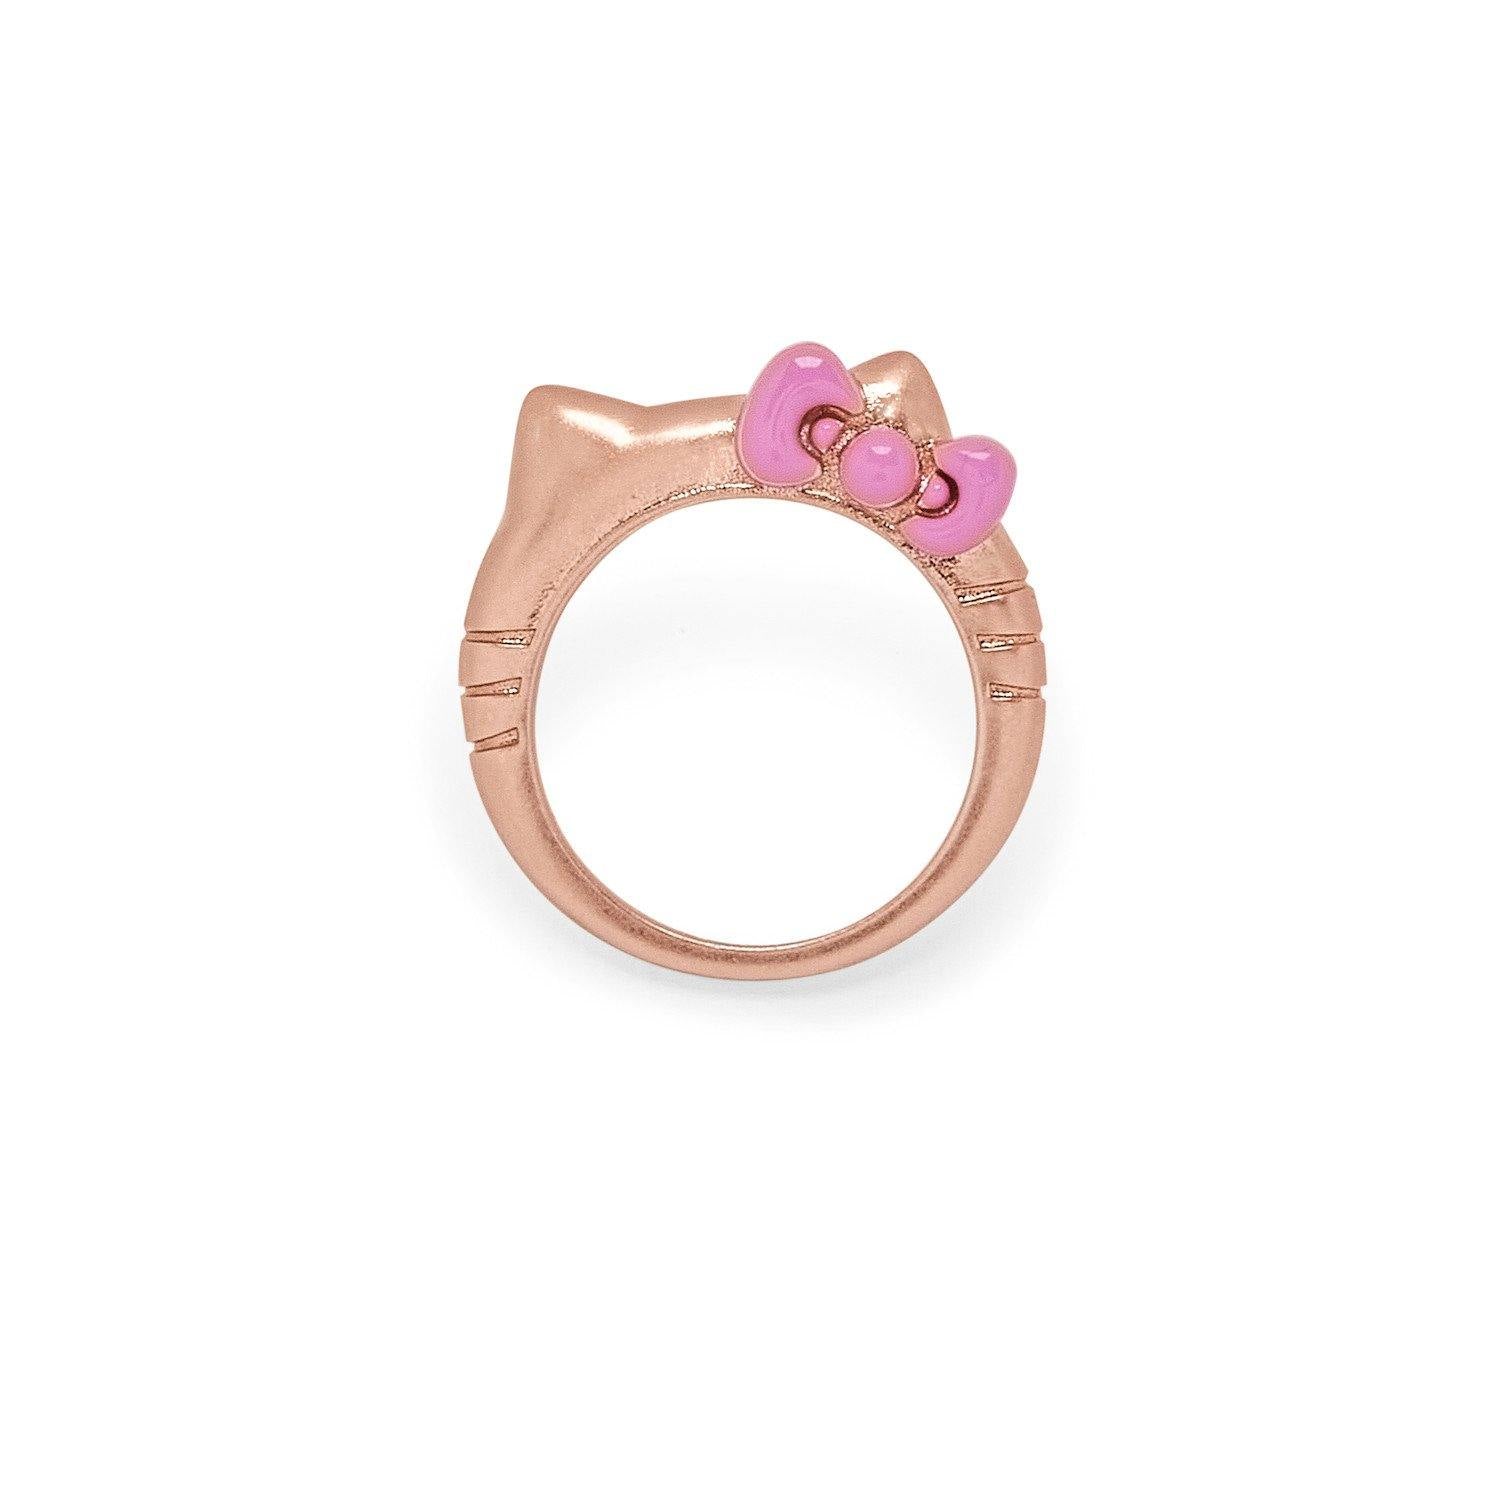 Hello kitty 🐈 | Engagement rings, Jewelry, Engagement